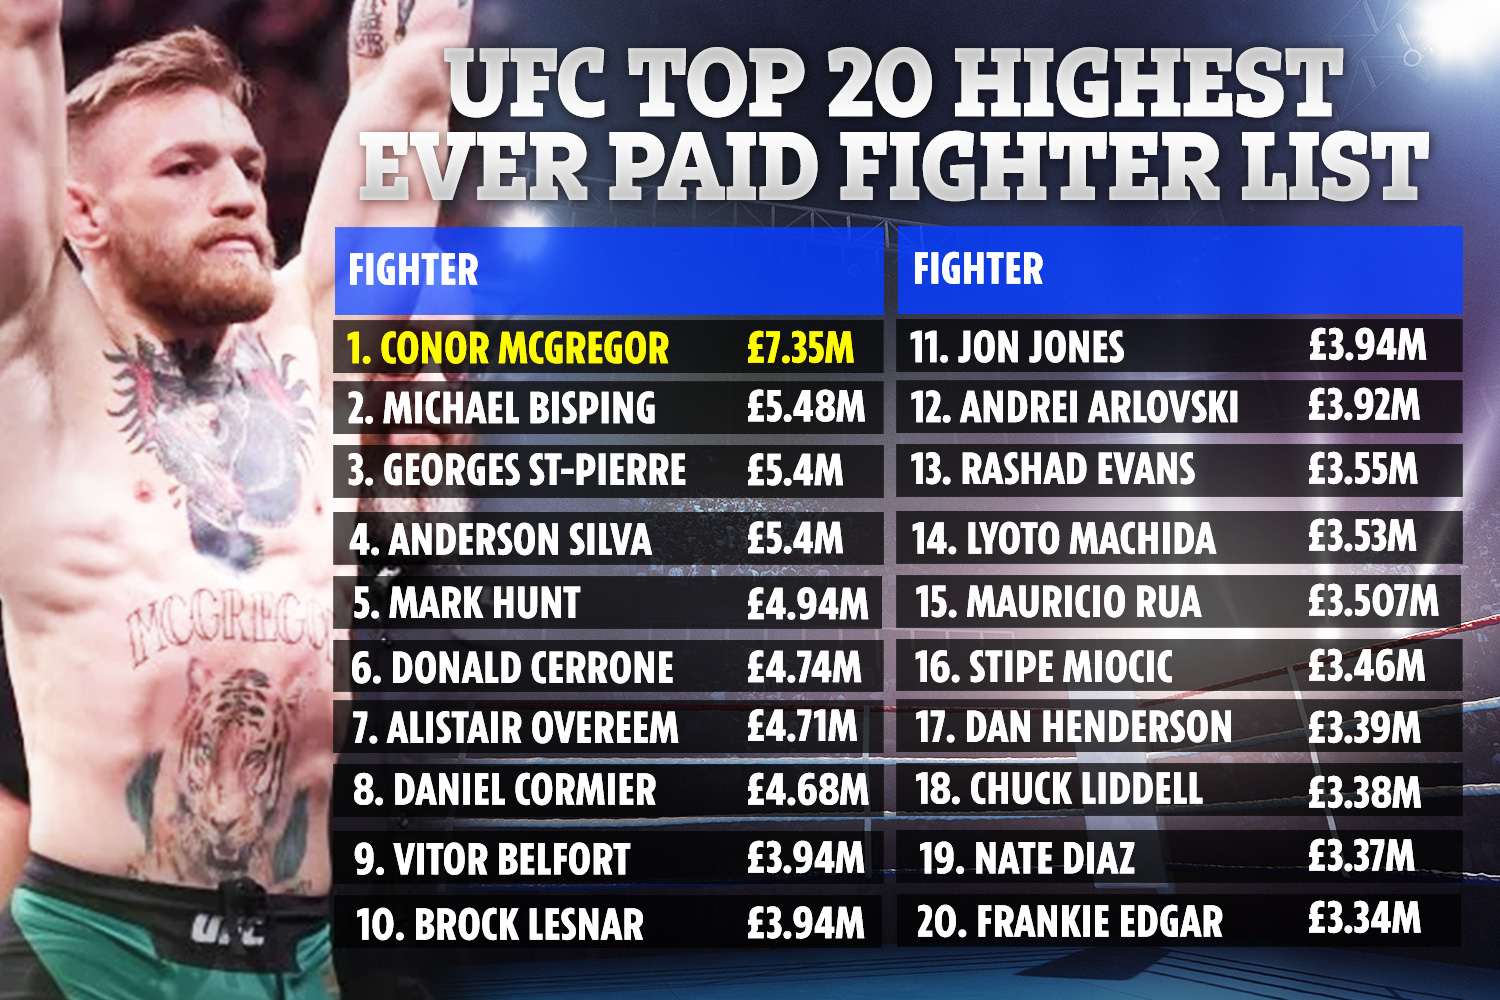 Photo: ufc fighter pay per fight